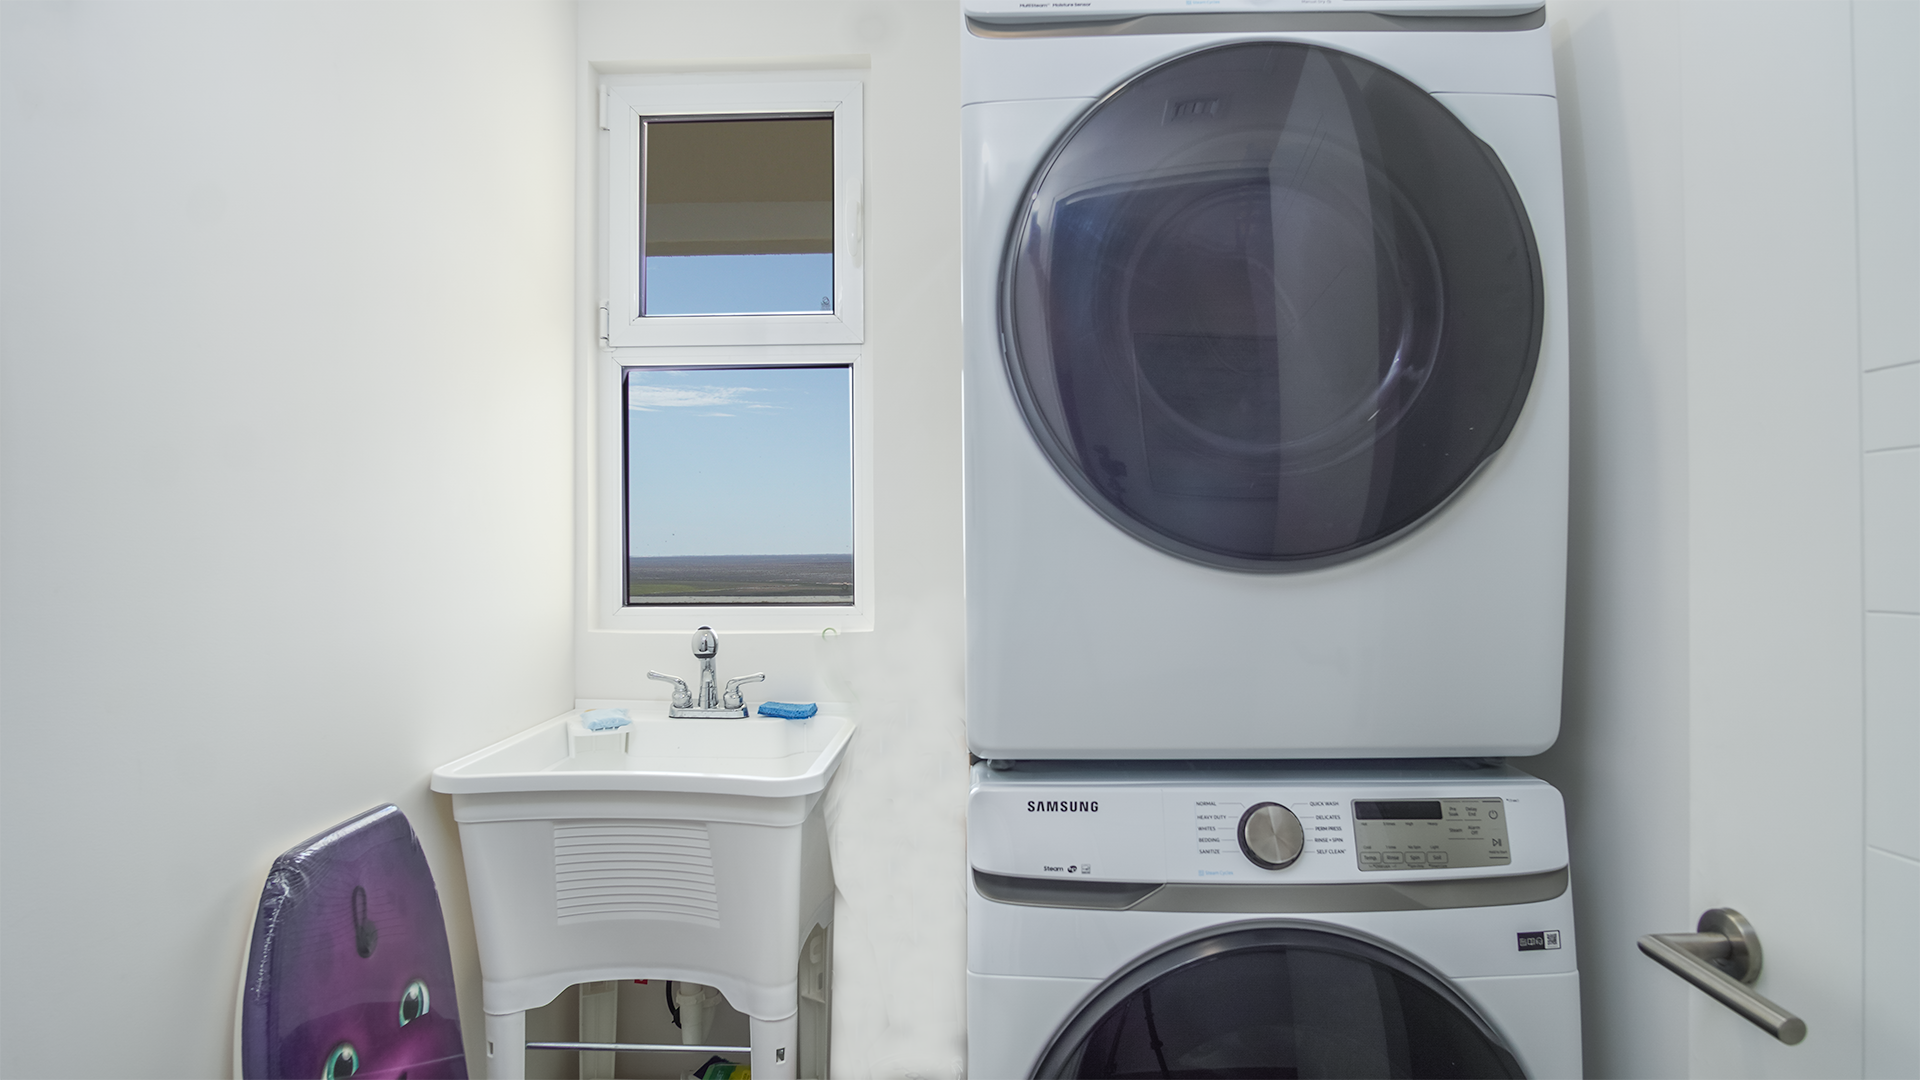 Utility space brings together a washer and dryer, sink, and space for more storage.